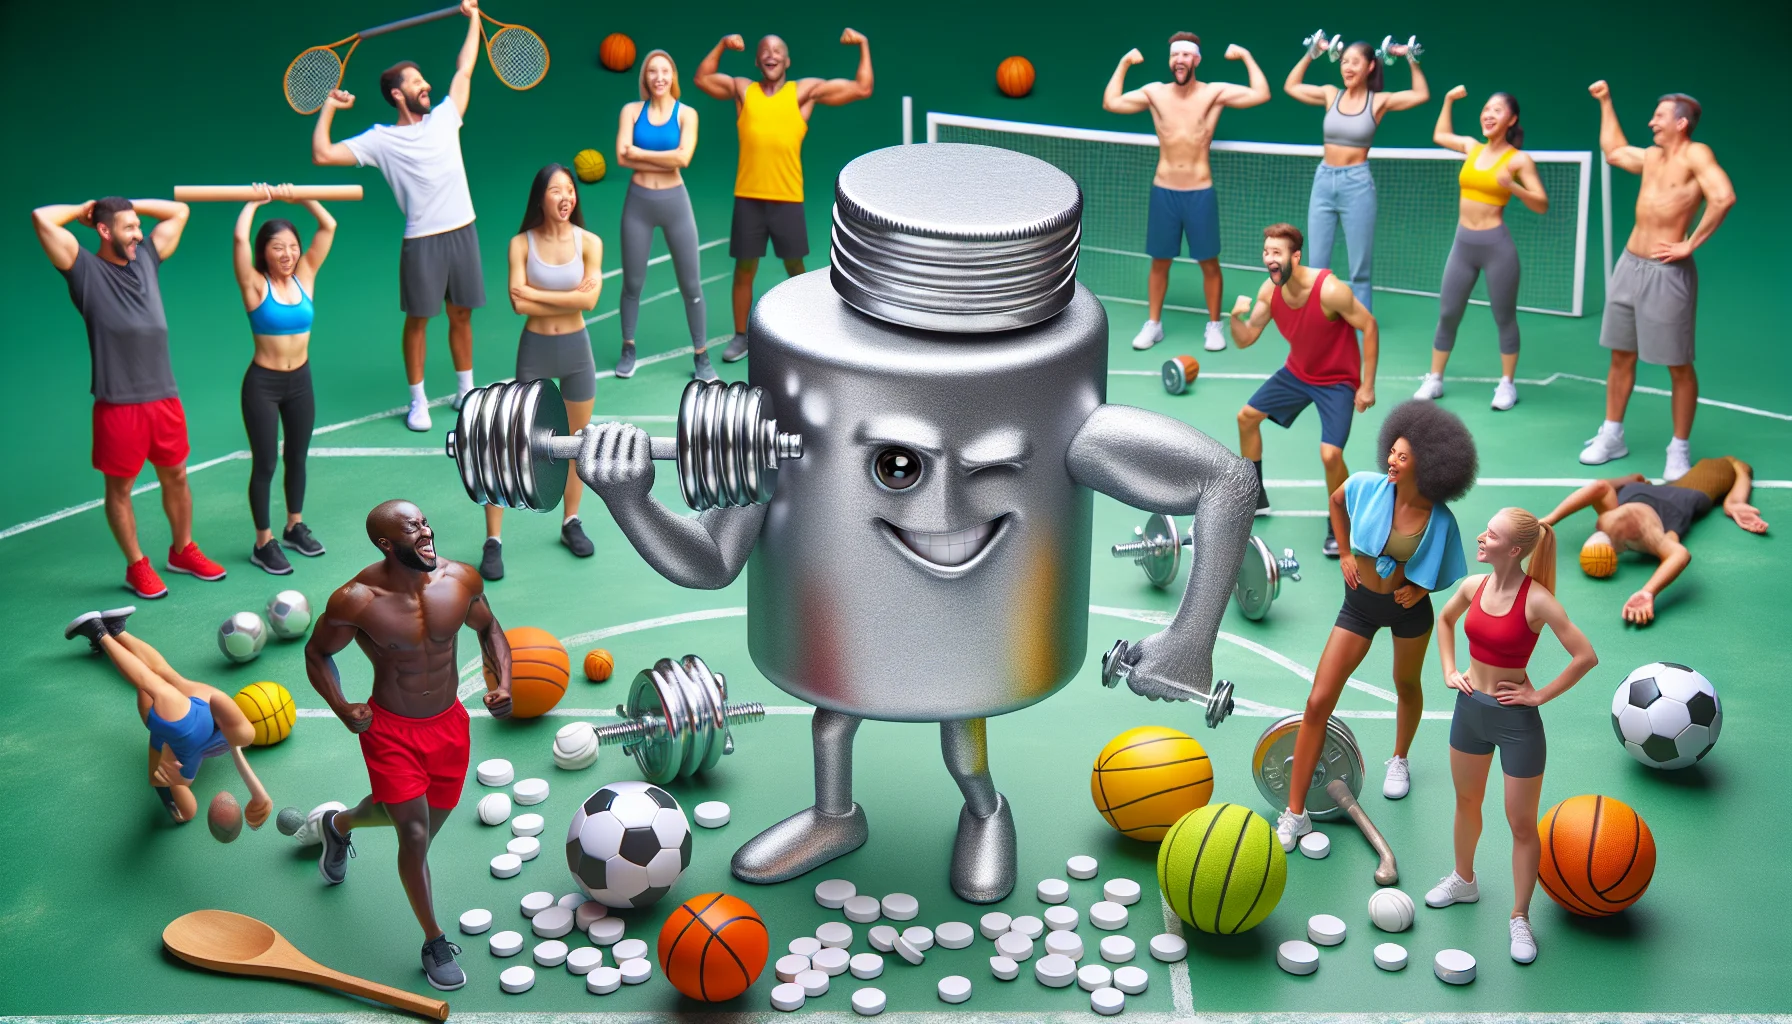 Create an eco-friendly image showcasing a piece of slim magnesium engaged in a hilarious scenario with people during a sports event. It is acting as a bodybuilder lifting miniature dumbbells, with a quirky smirk on its metallic face. Surrounding it are a group of athletic individuals of various descents like Black, Asian, Hispanic, Middle-Eastern, and Caucasian, with equal representation of both genders, getting drawn to it and showing expressions of amazement. Infuse colors that enhance the context of sports supplements and incorporate elements indicating the positive effects of magnesium supplements. Include some sports equipment like basketballs, tennis rackets as well to emphasise the sports setting.